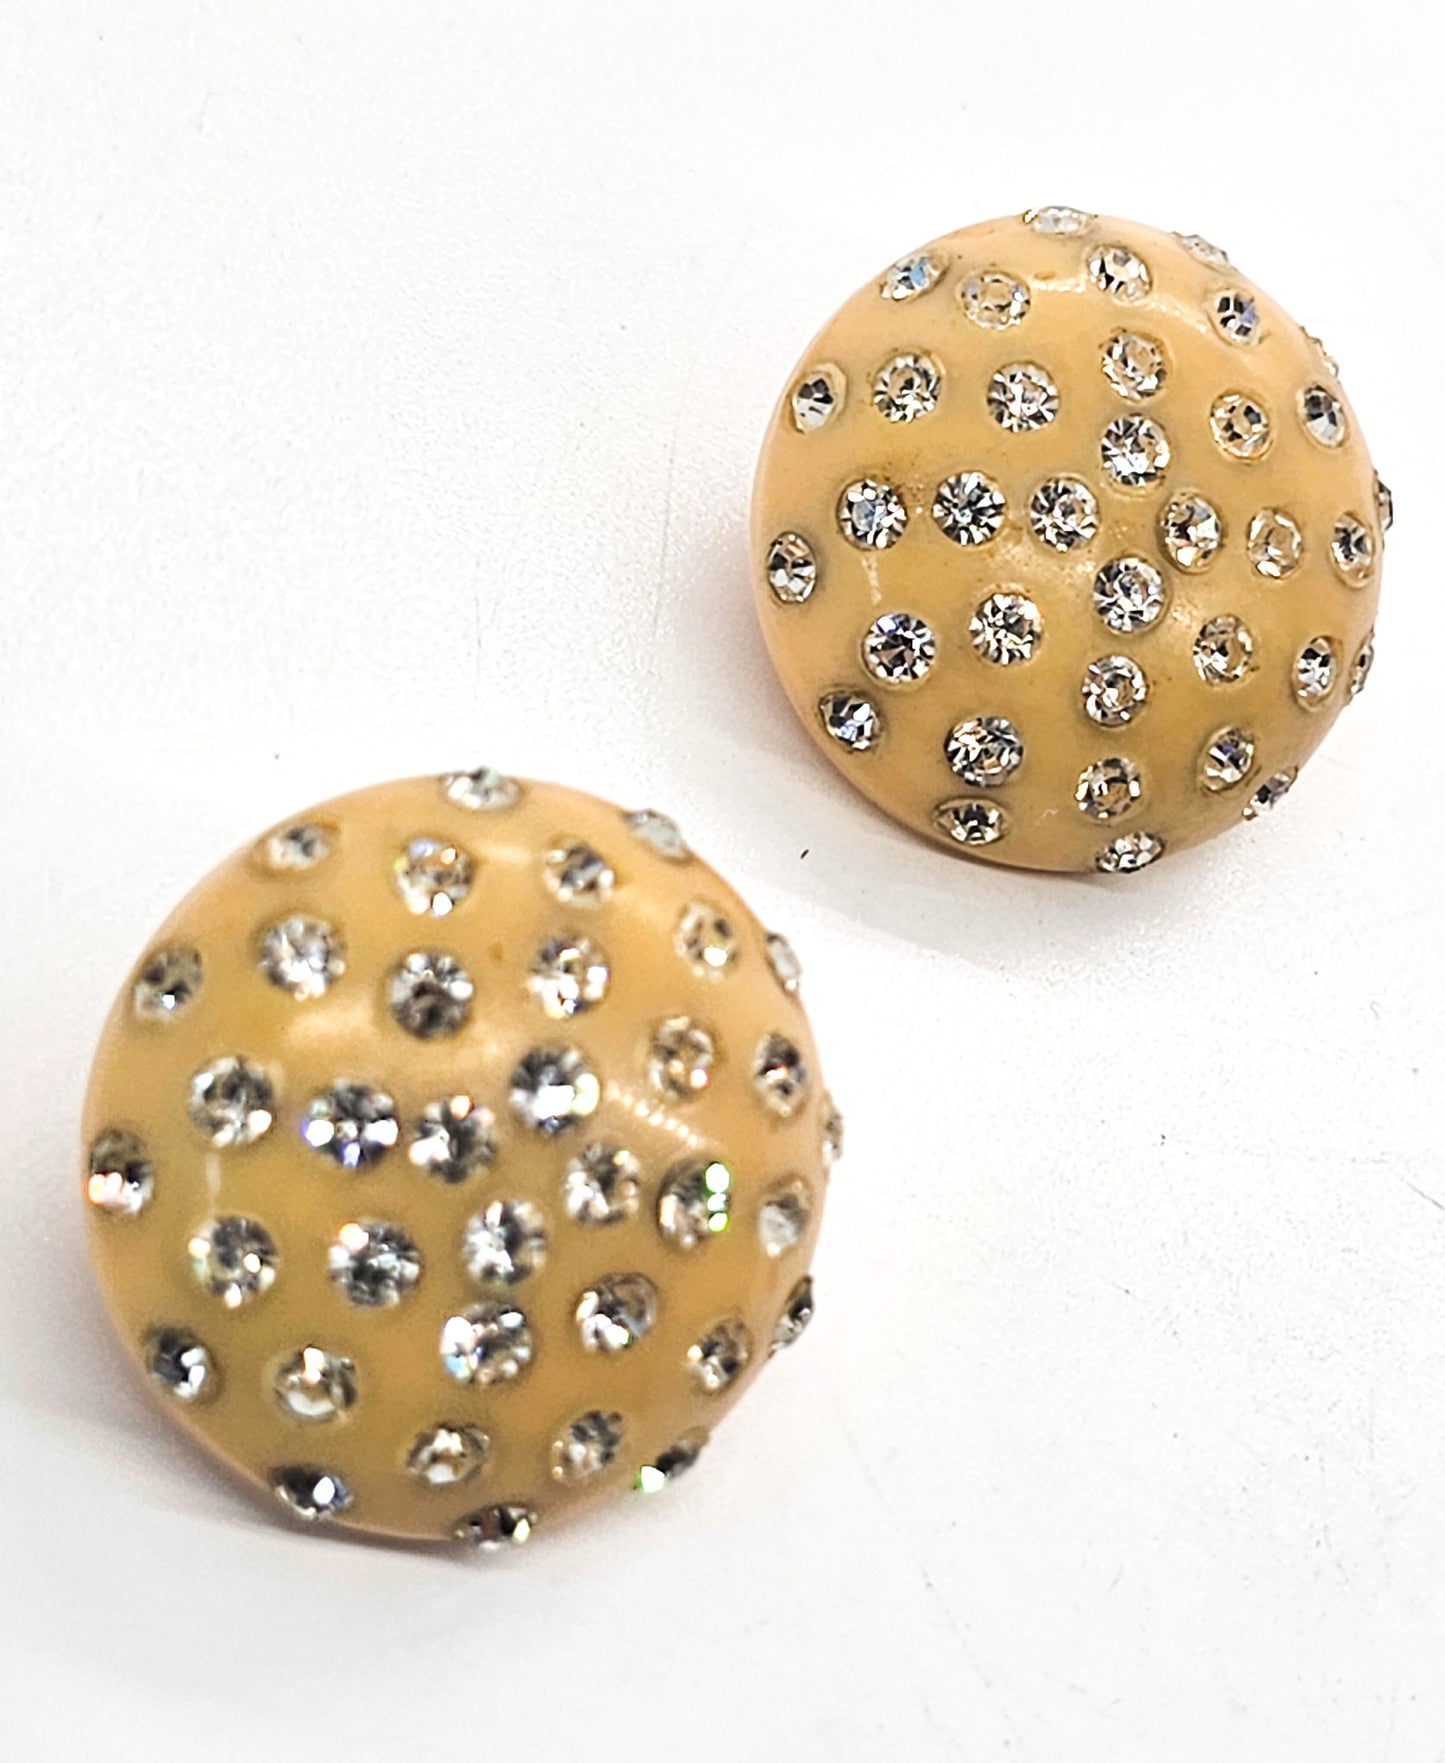 Weiss celluloid and rhinestone vintage singed clip on earrings